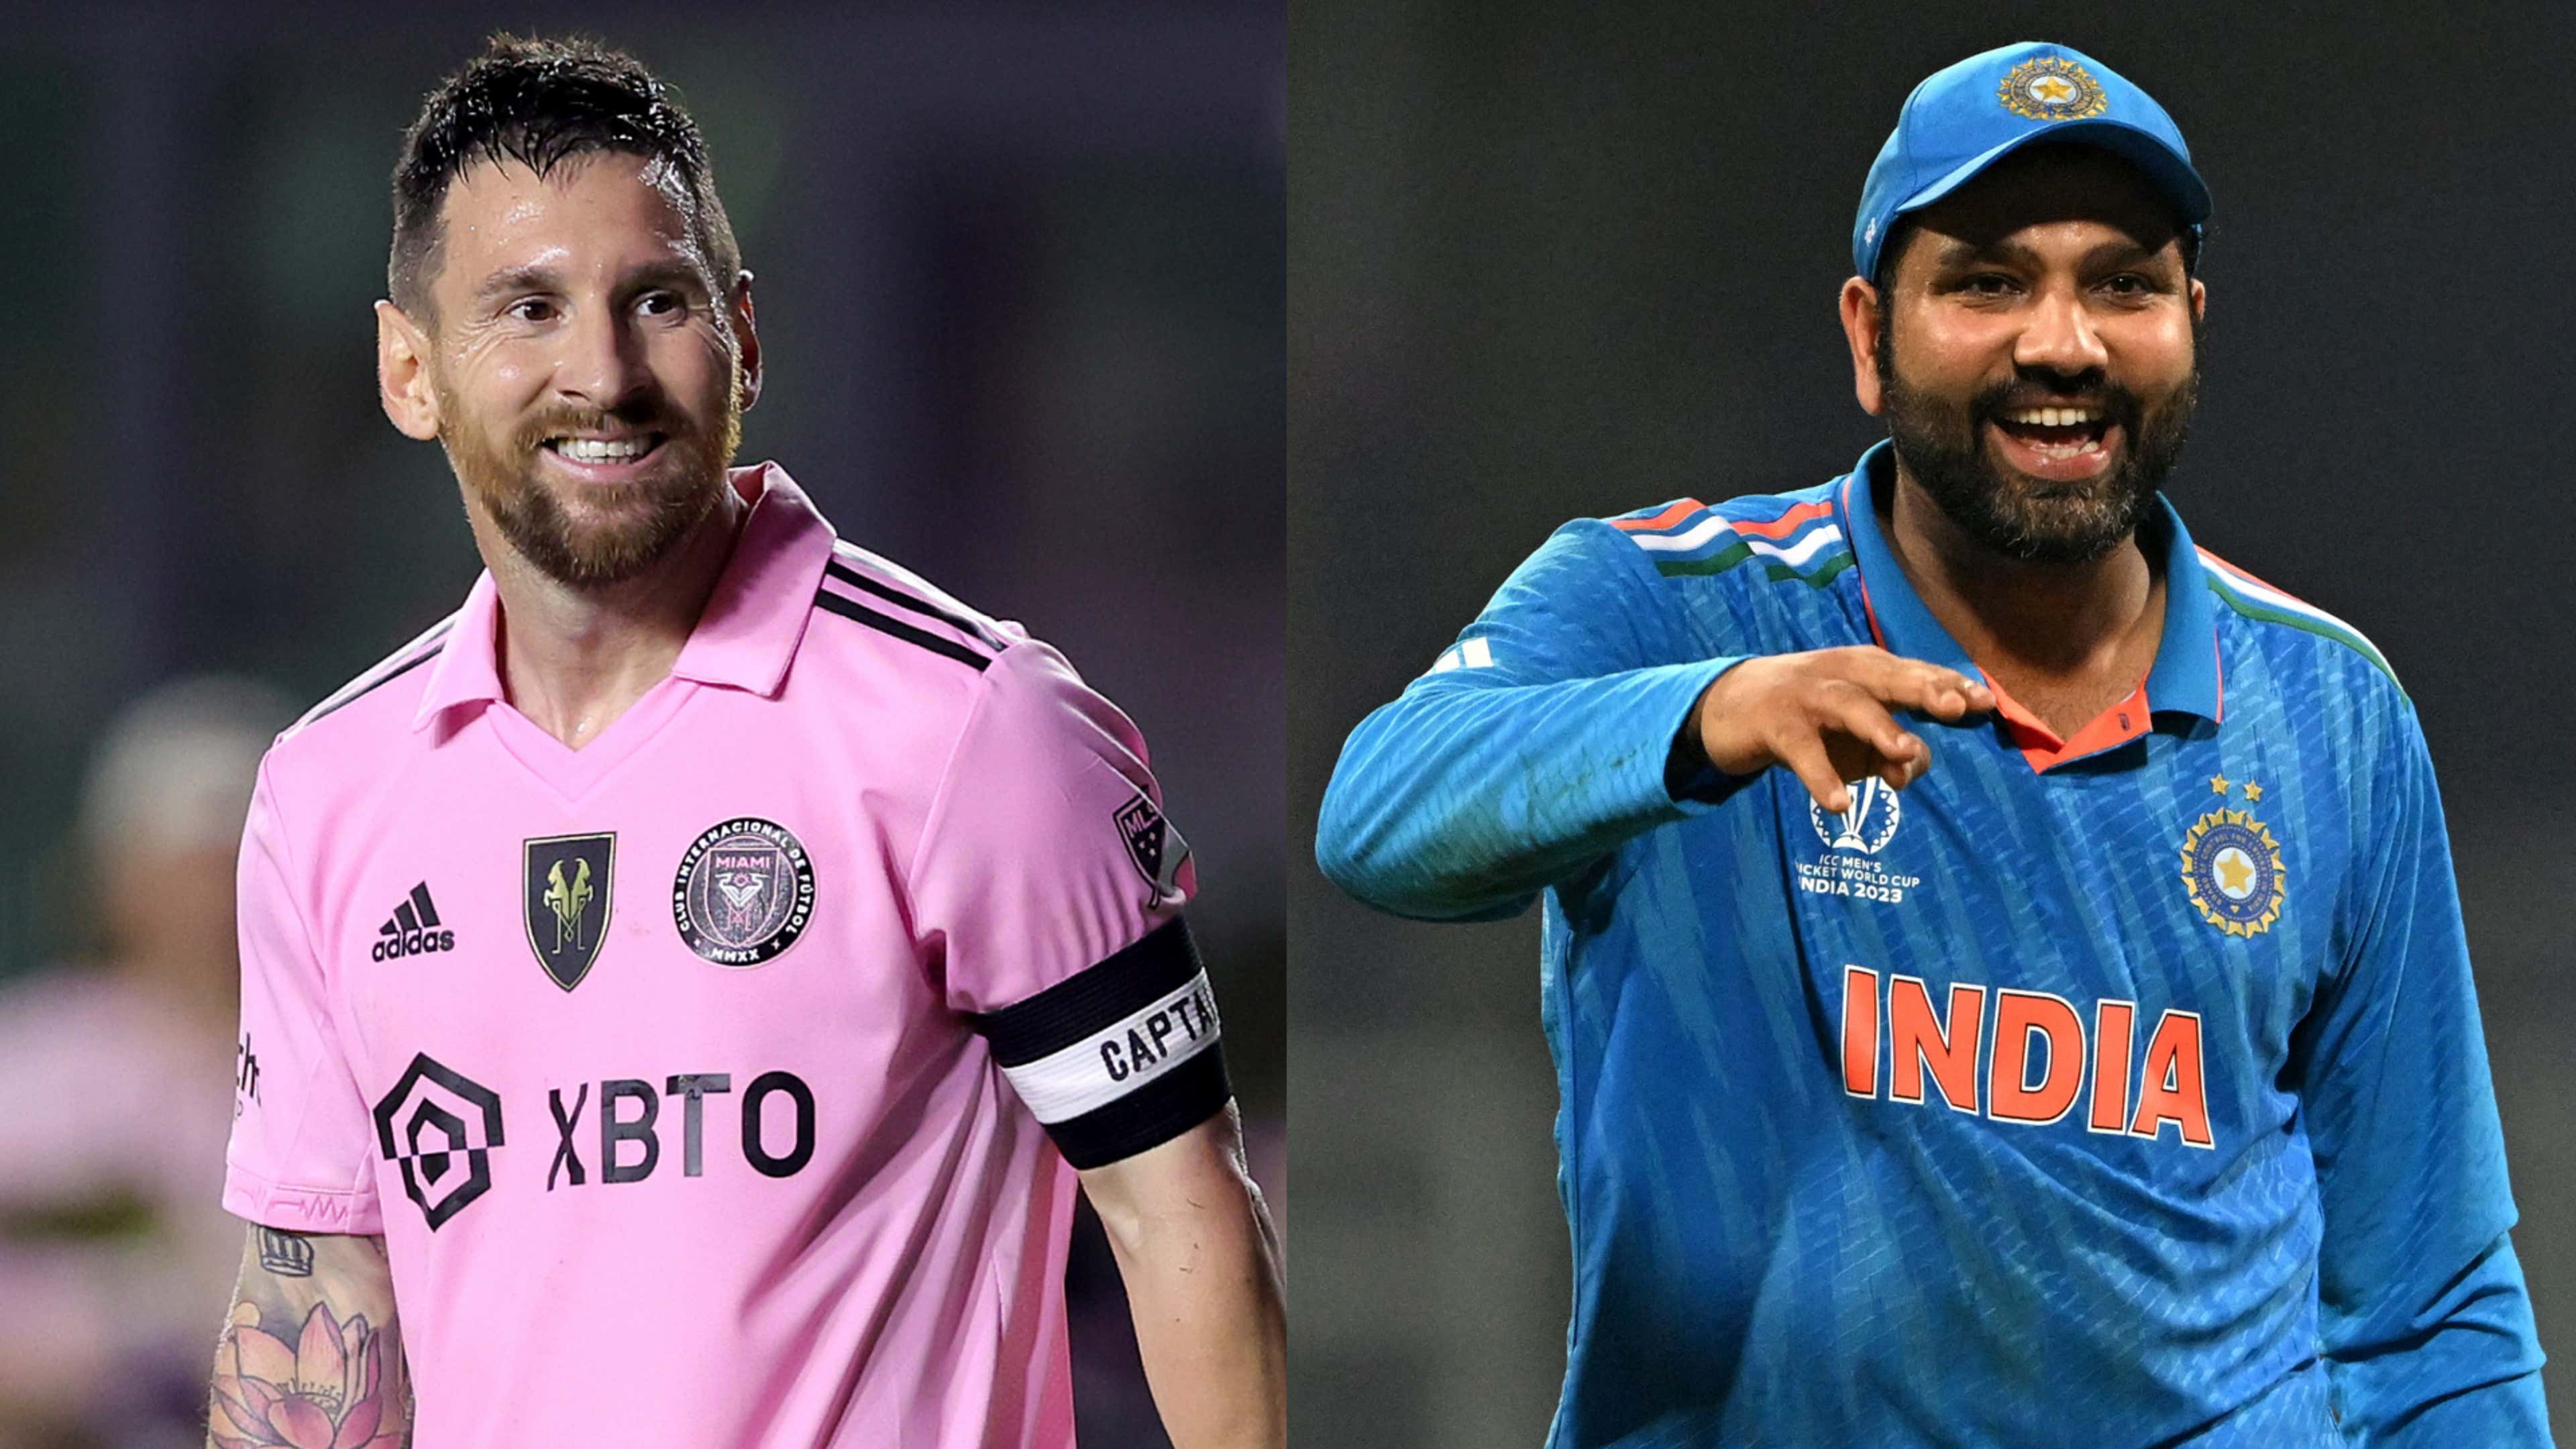 Lionel Messi has fans everywhere! Cricket icon Rohit Sharma presented with gift by David Beckham ahead of India's epic showdown with Australia | Goal.com